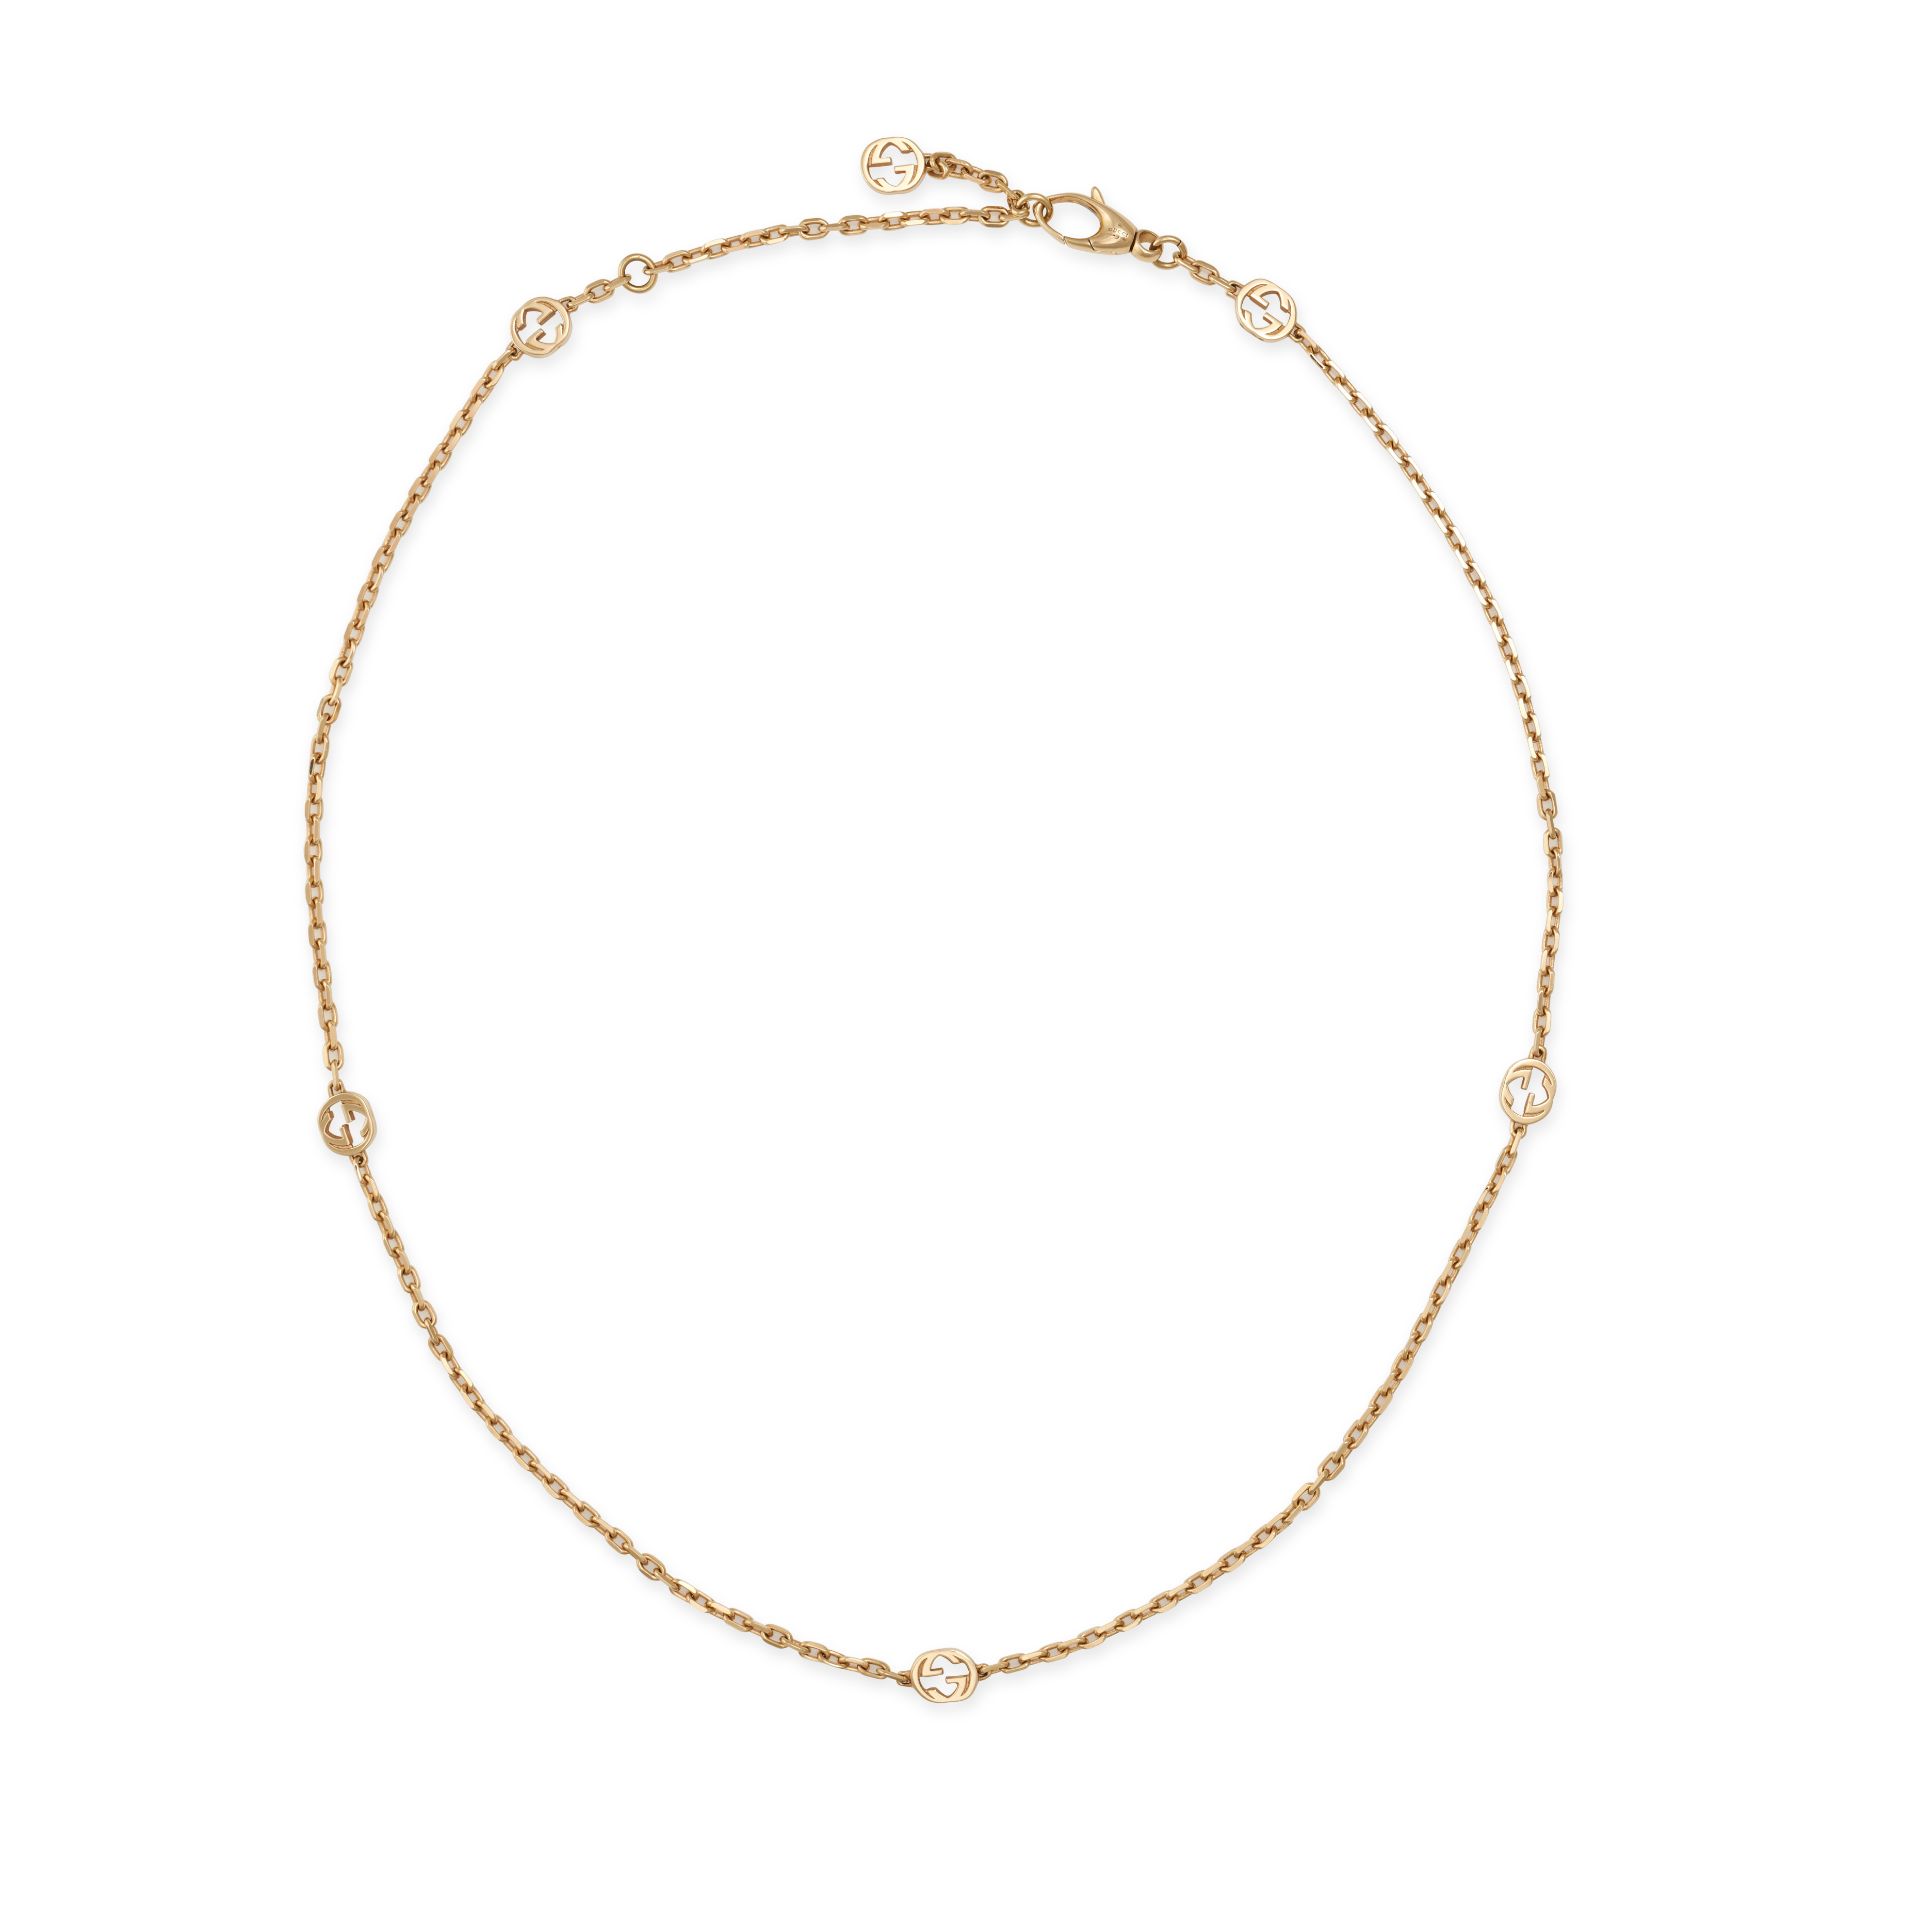 NO RESERVE - GUCCI, A GG NECKLACE comprising a trace chain accented by interlocking GG motifs, si...